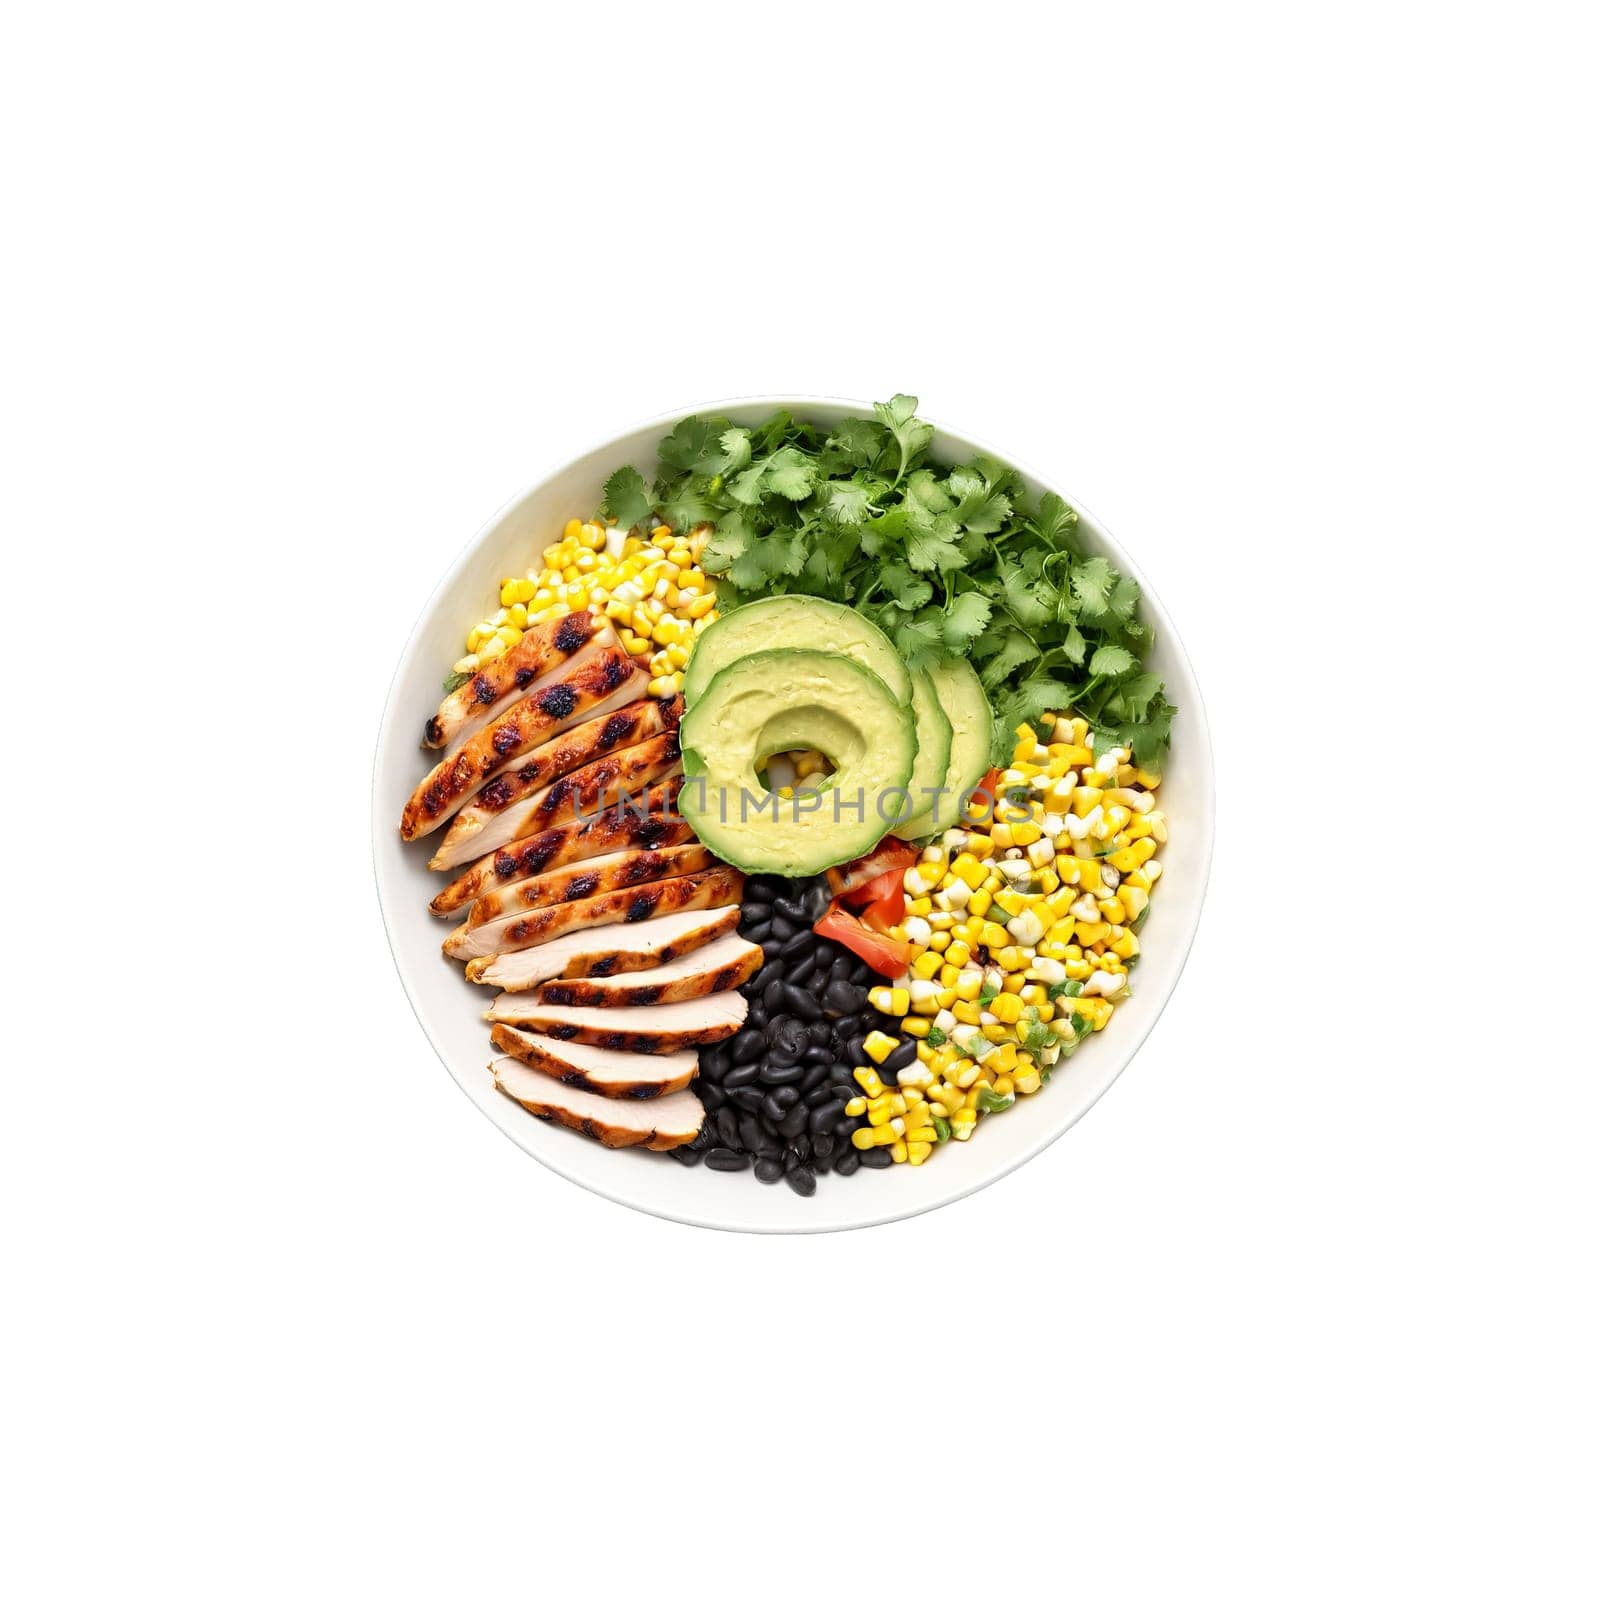 Southwest chicken salad elements above prepared bowl blackened chicken corn and black beans drifting regally by panophotograph